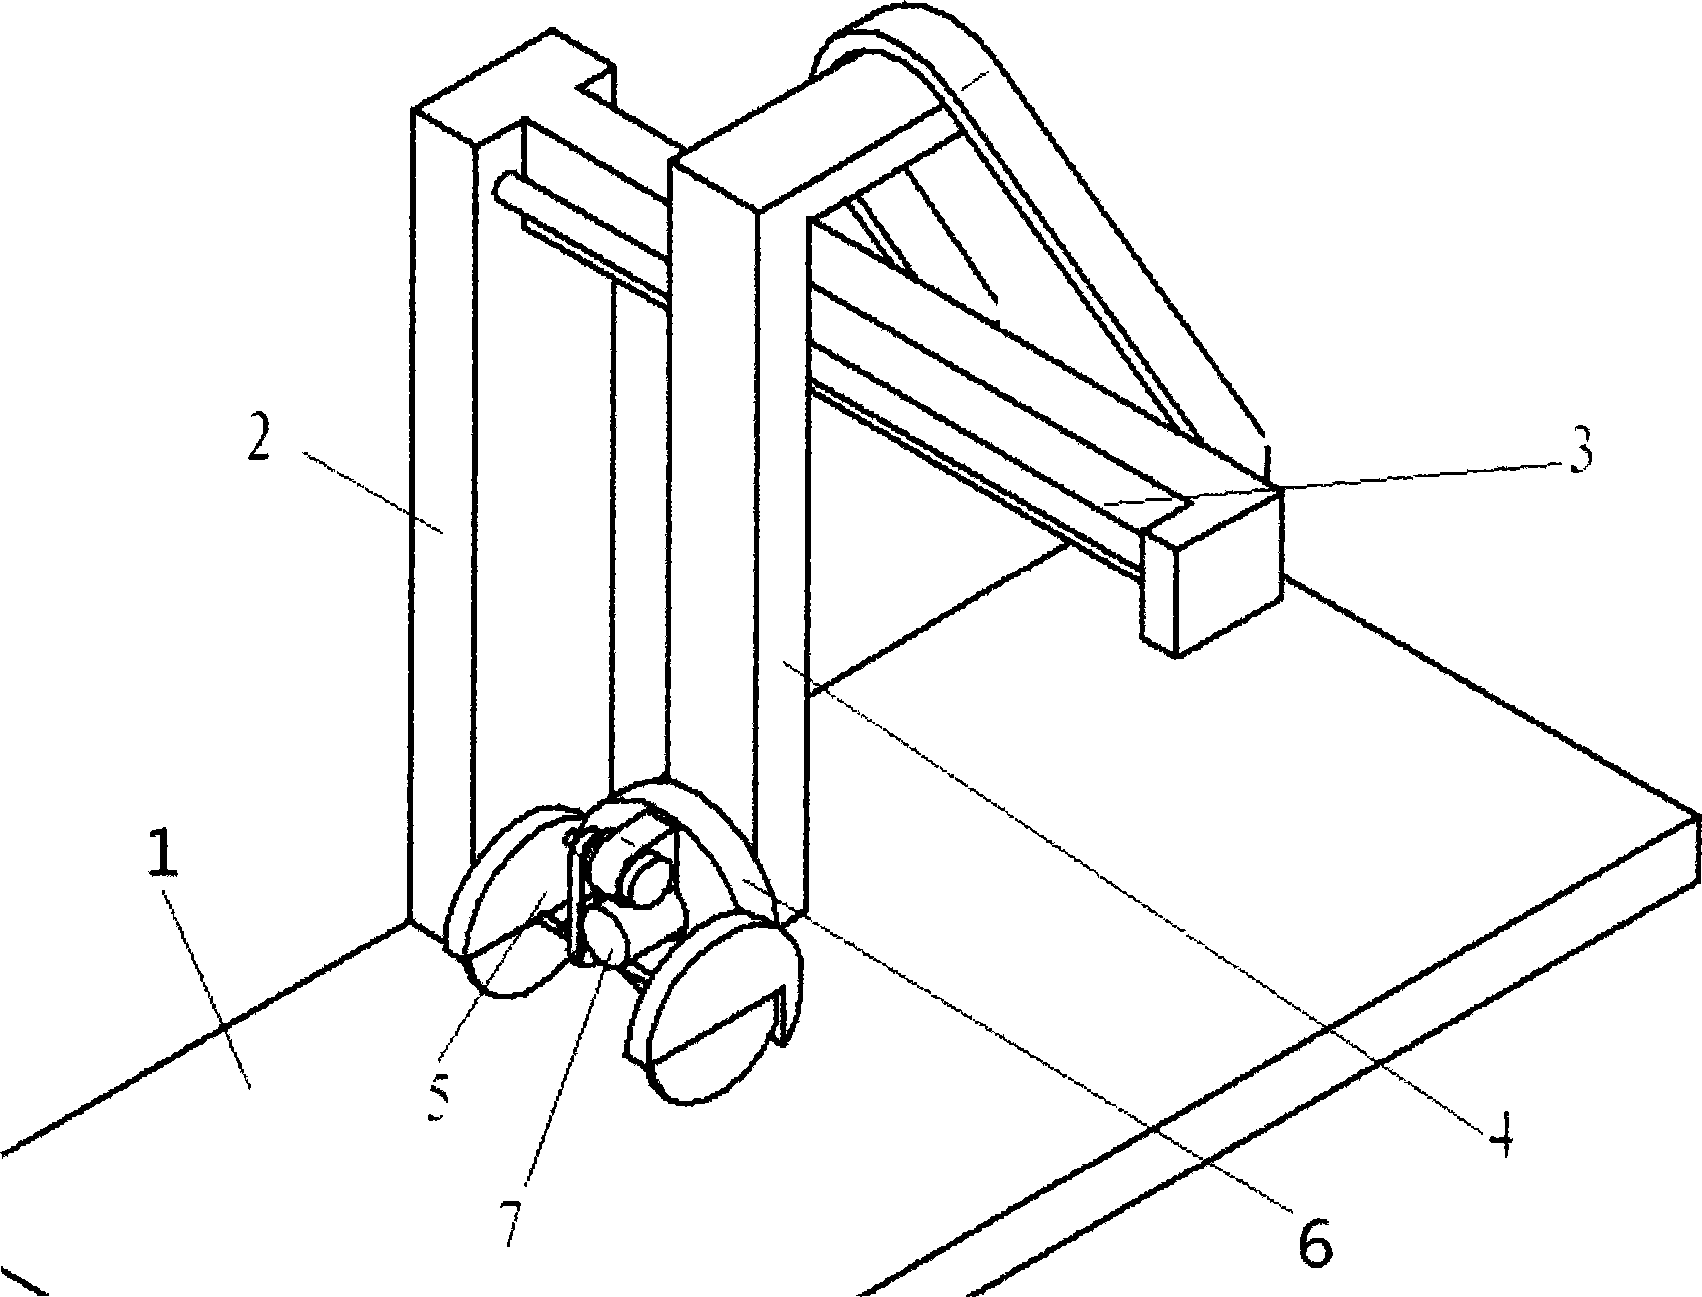 Computer numerical control special-shaped stone cutting machine